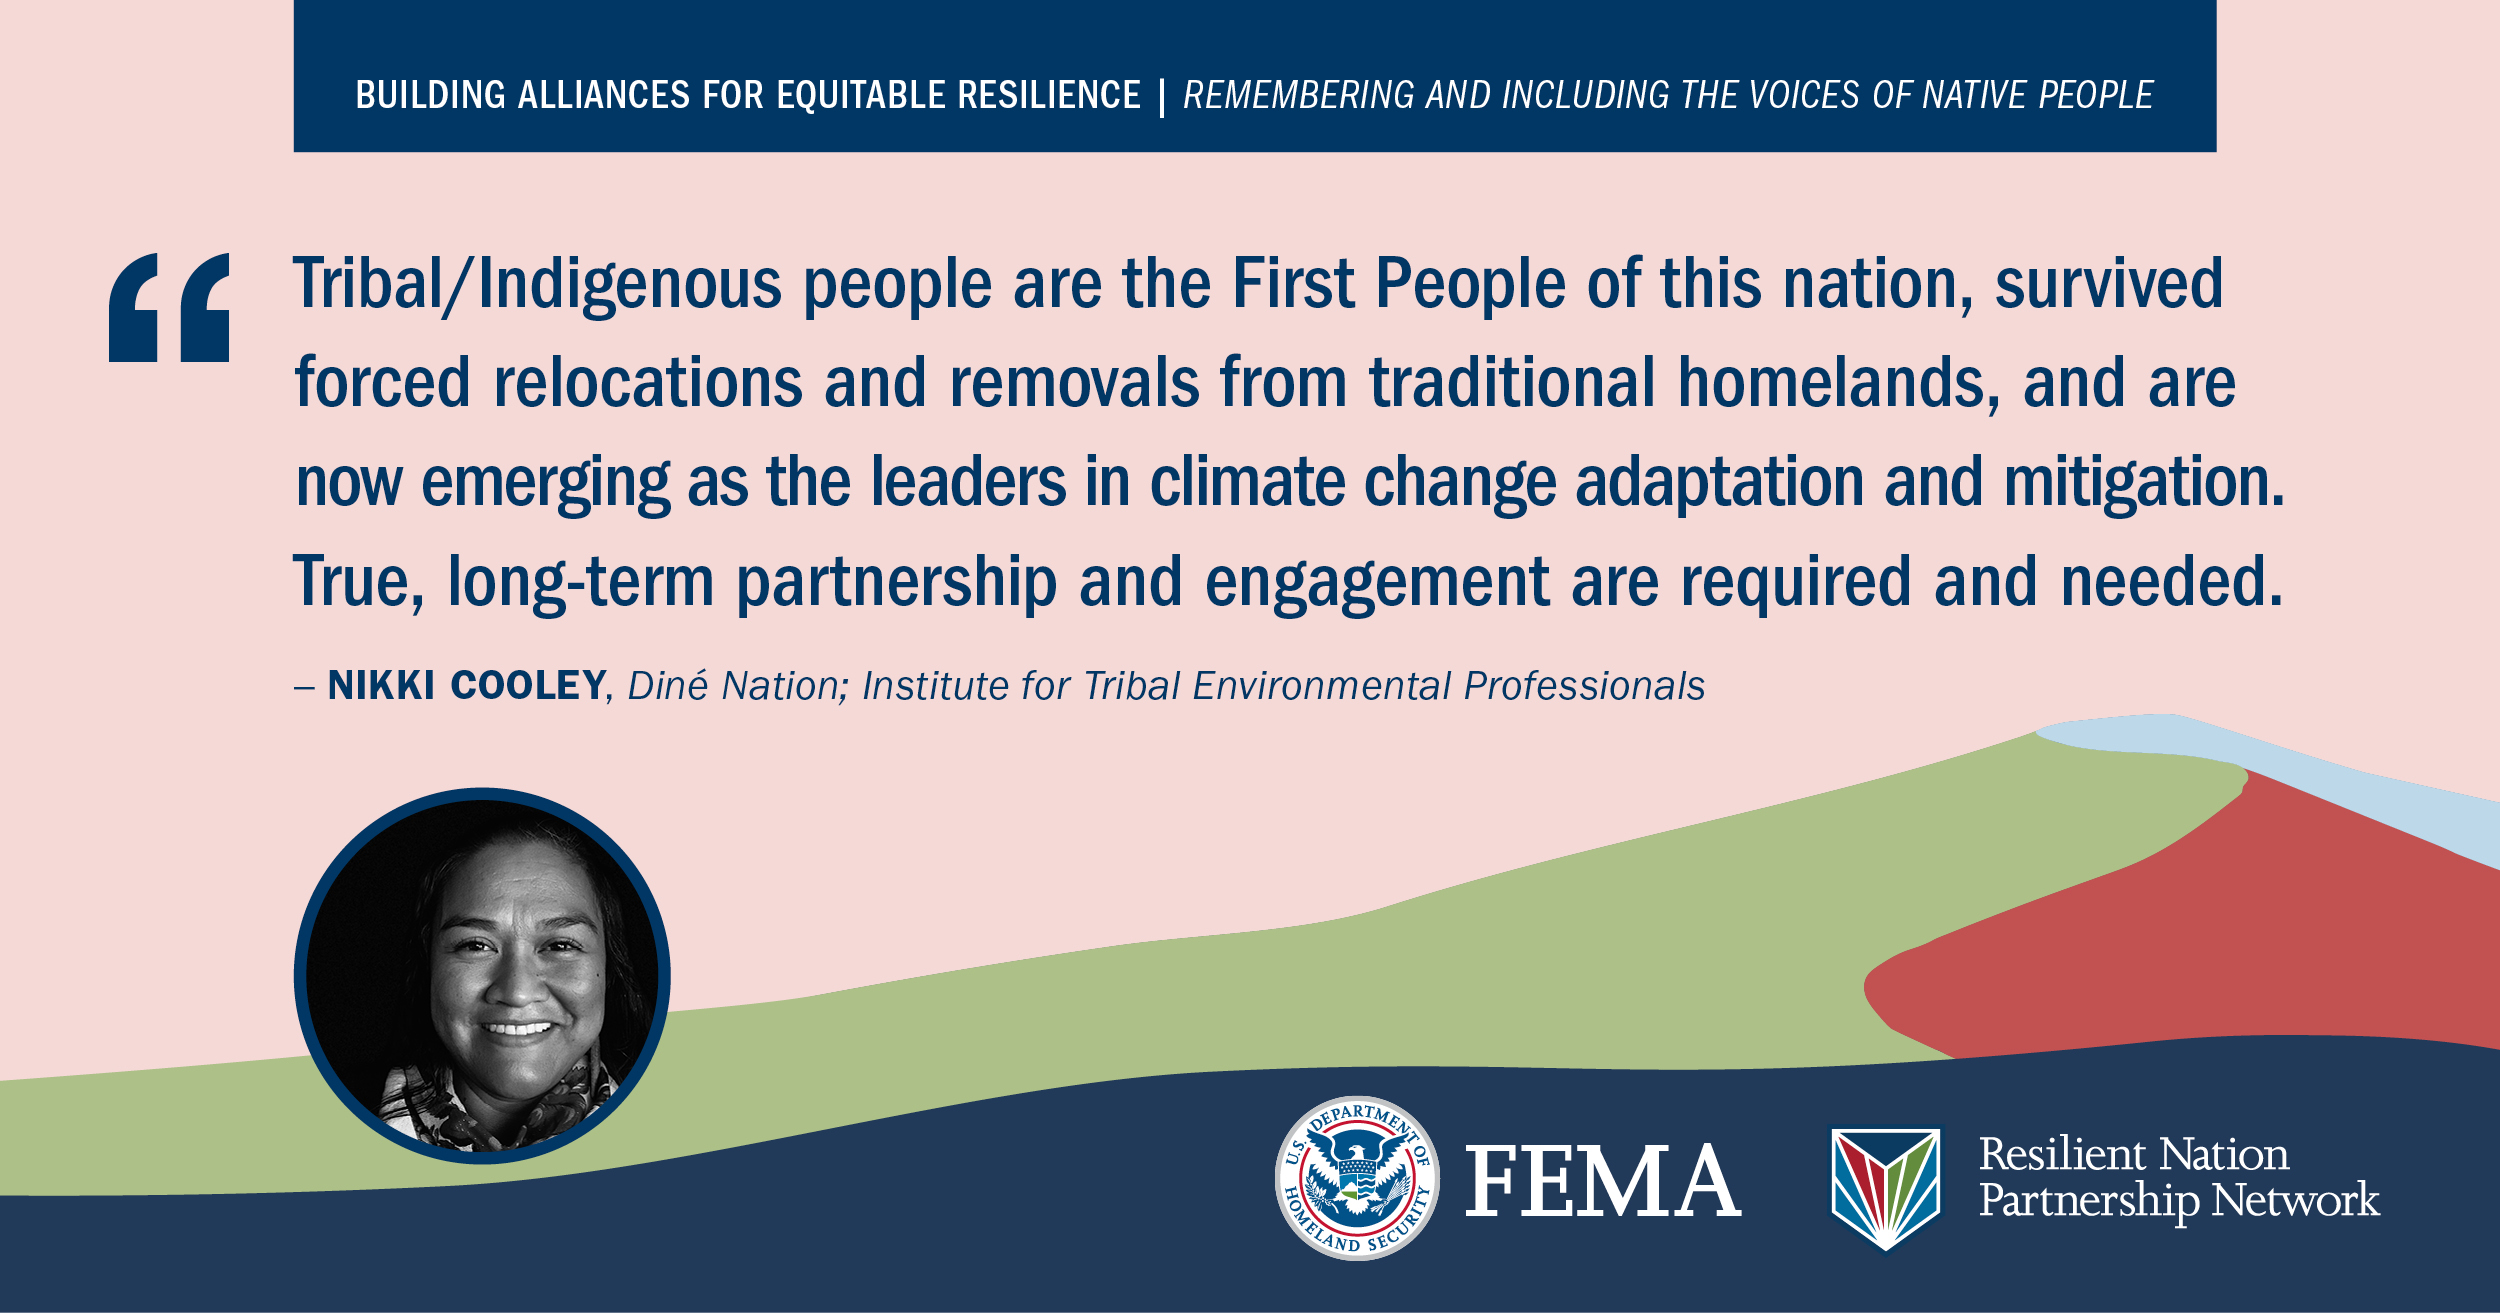 “Tribal/indigenous people are the First People of this nation, survived forced relocations and removals from traditional homelands, and are now emerging as the leaders in climate change adaptation and mitigation. True, long term partnership and engagement are required and needed.” -Nikki Cooley, Dine Nation; Institute for Tribal Environmental Professionals